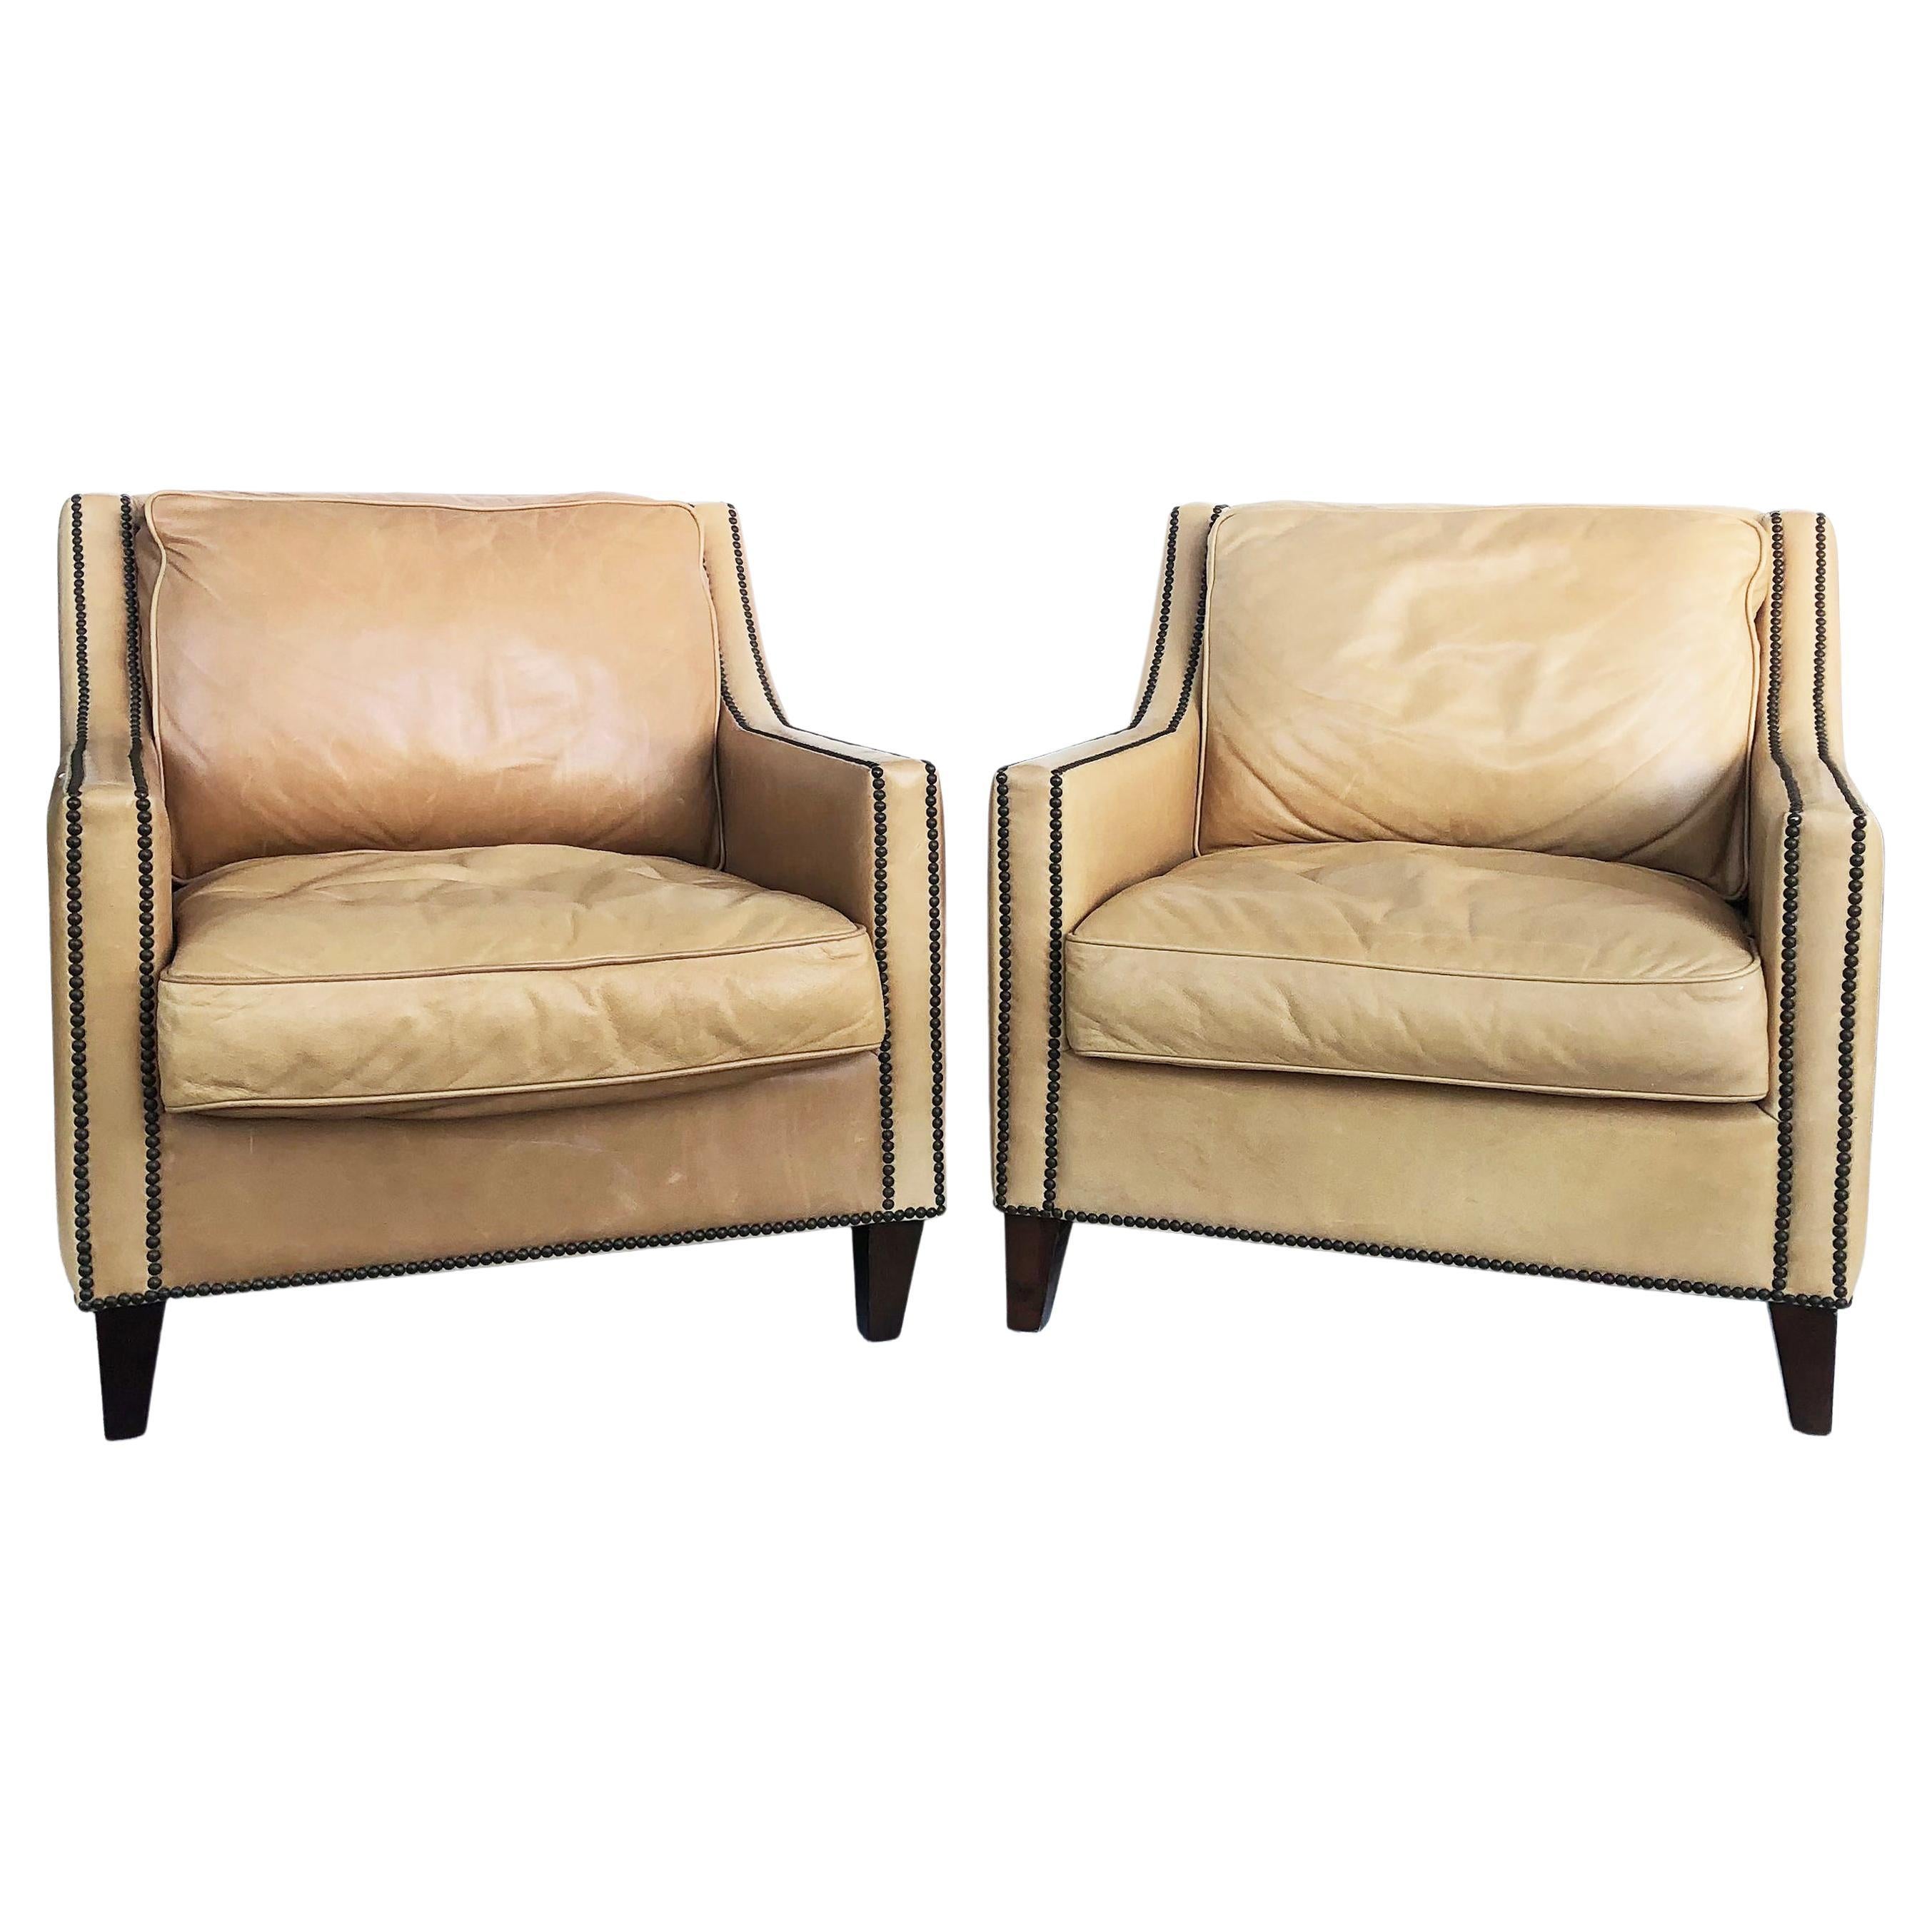 Bloomingdale's Elite Leather Club Chairs, Brass Nailheads, a Pair